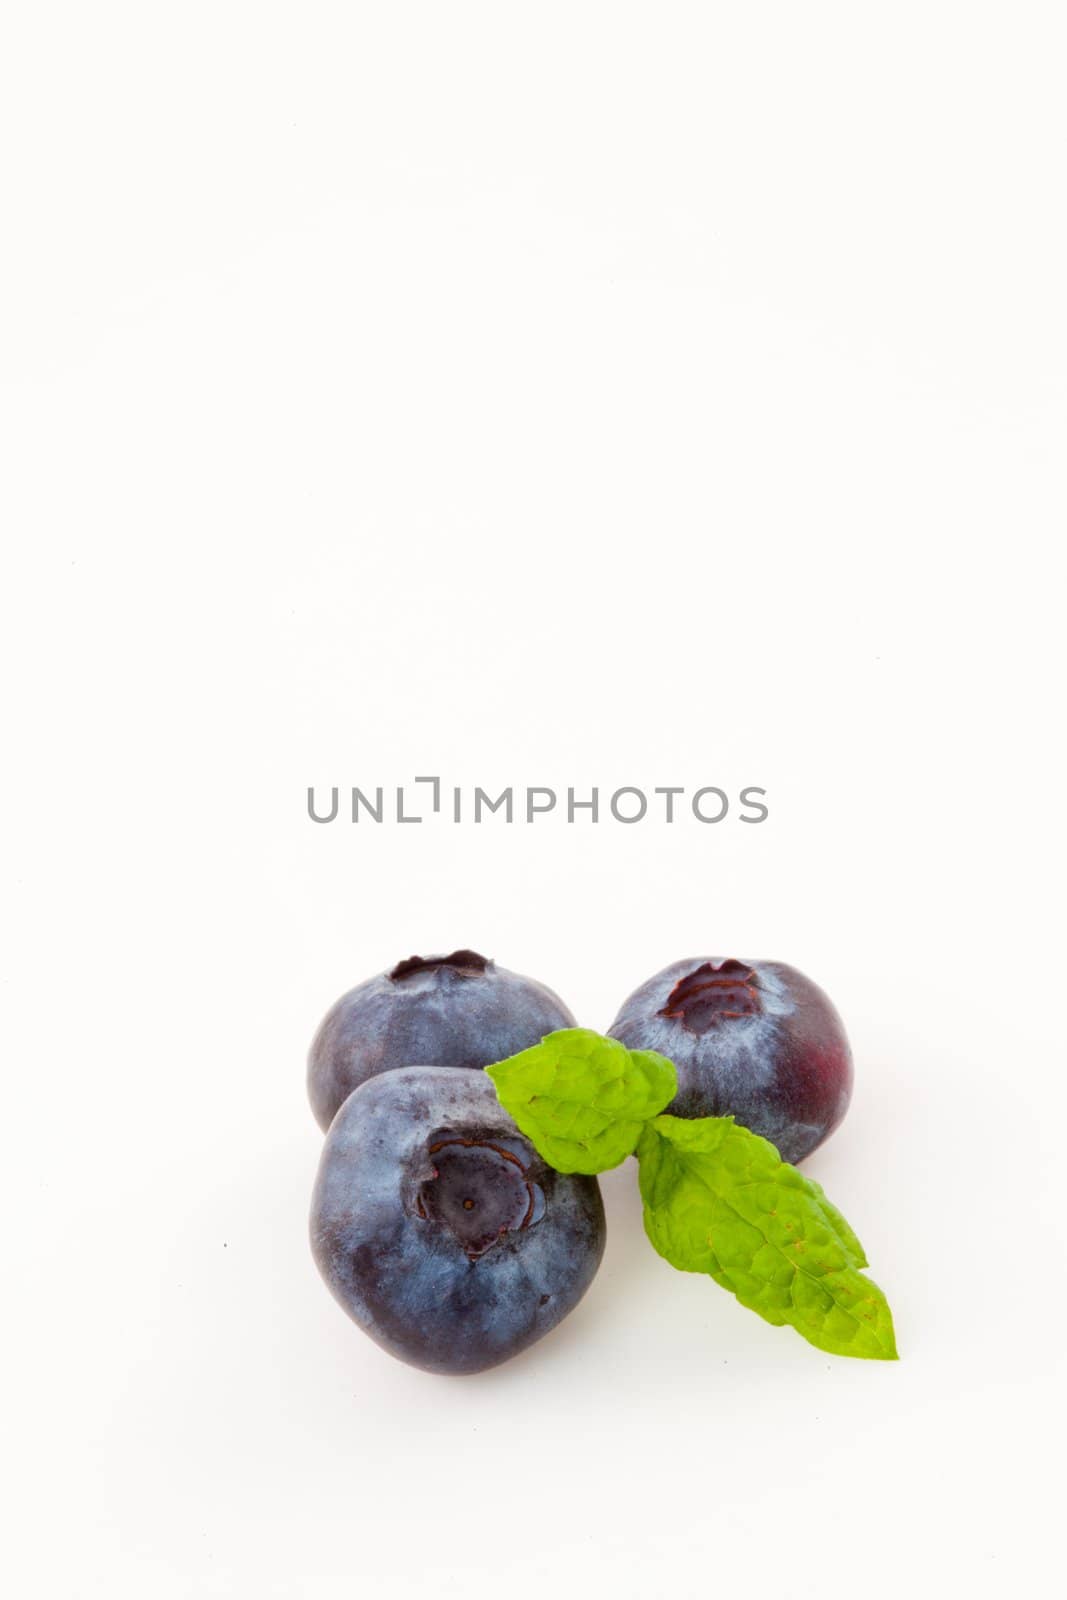 Blueberries against a white background